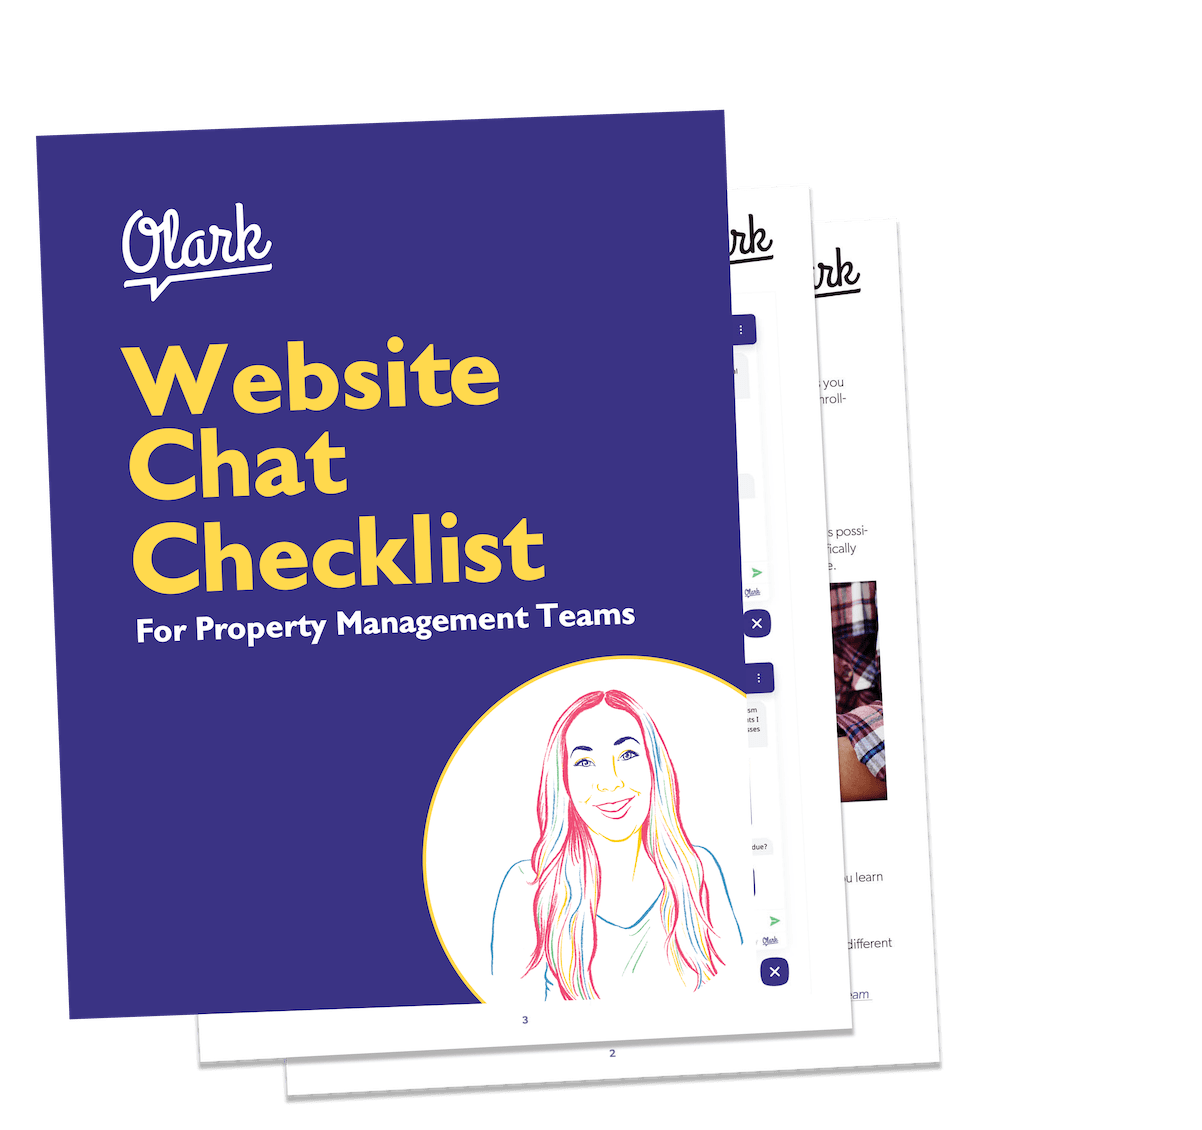 an ebook cover titled Website Chat Checklist for Property Management Teams